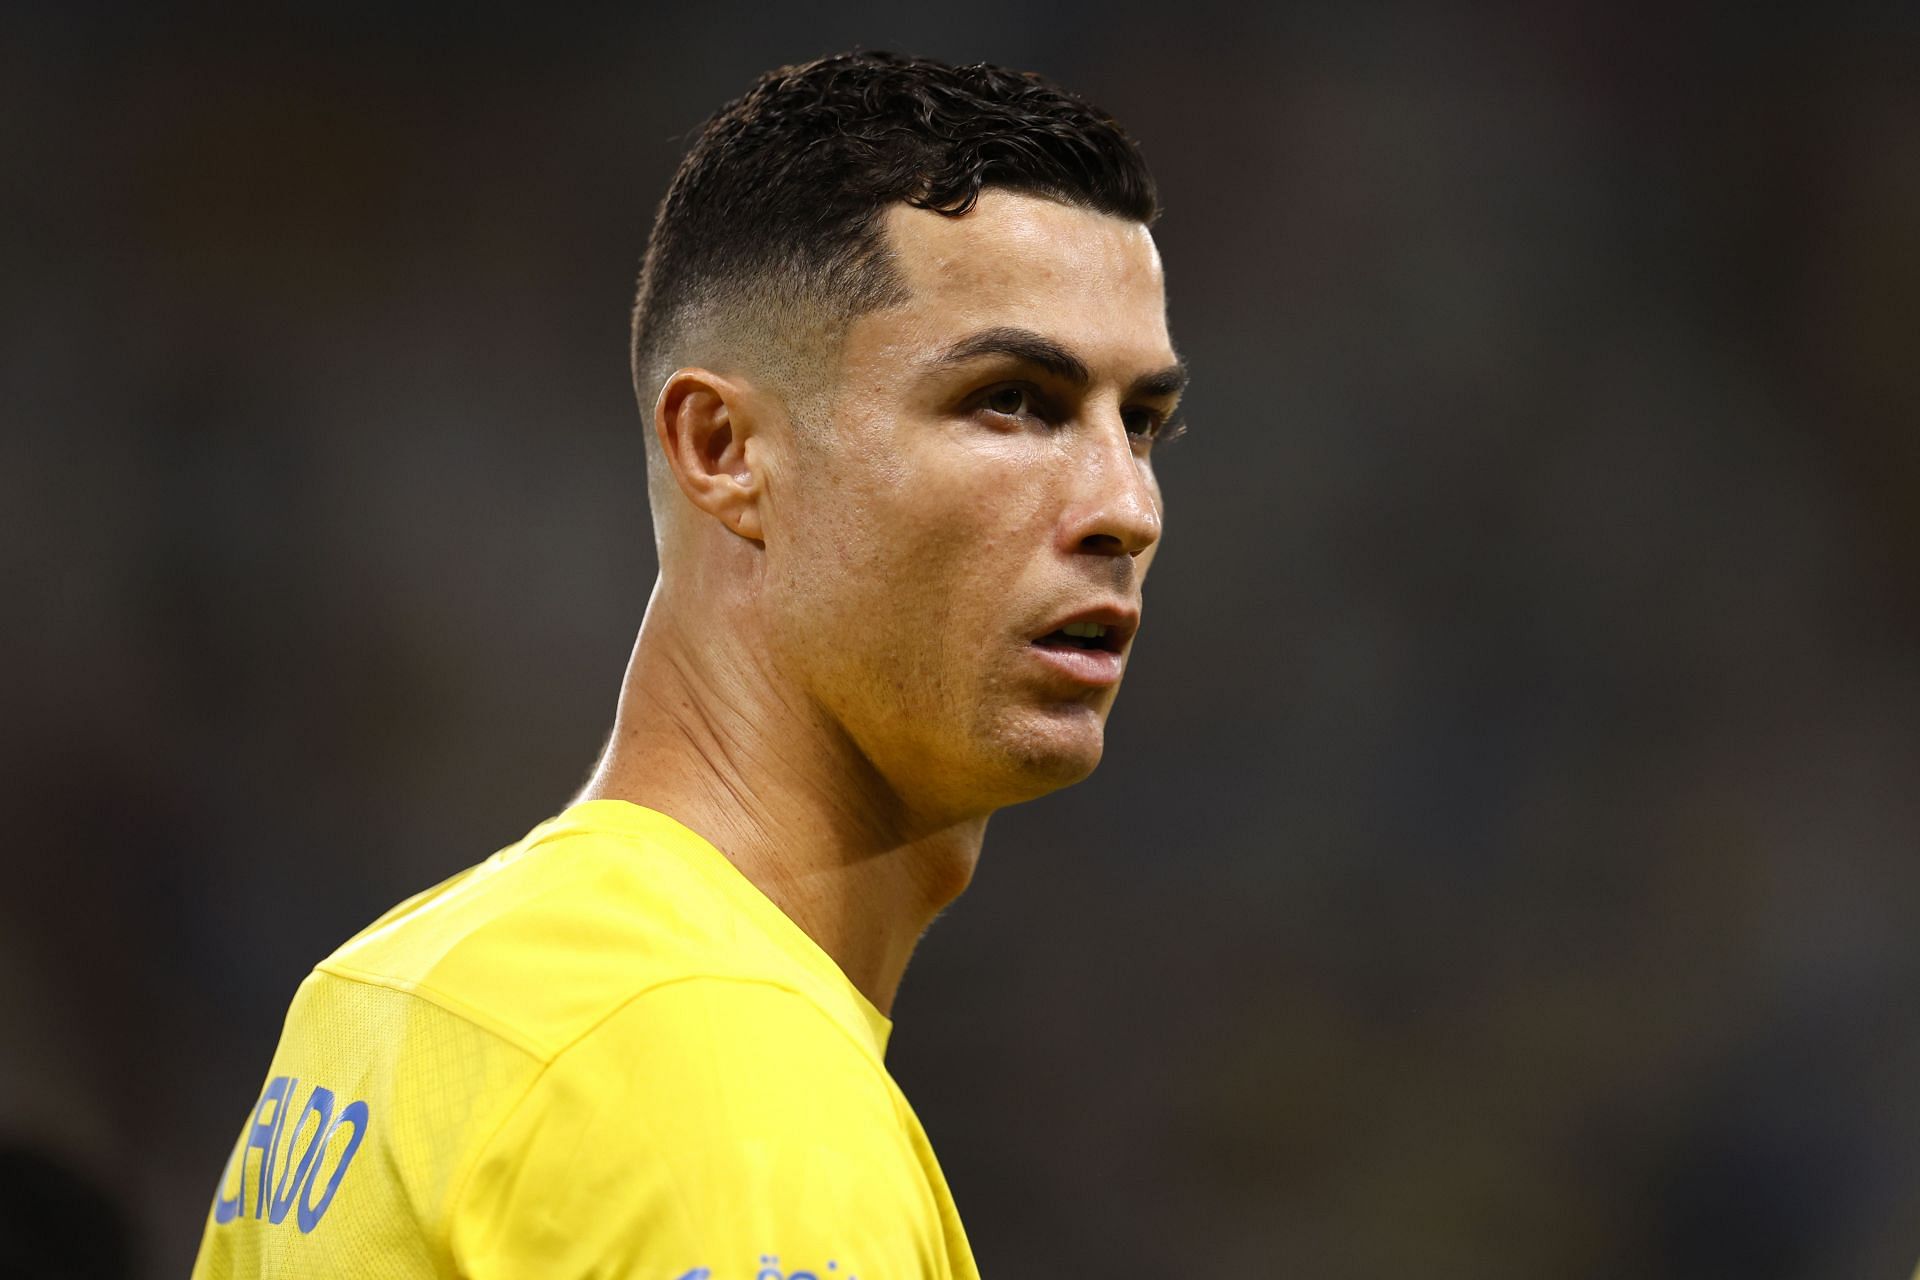 Cristiano Ronaldo wants to extend his stay at Al-Nassr.